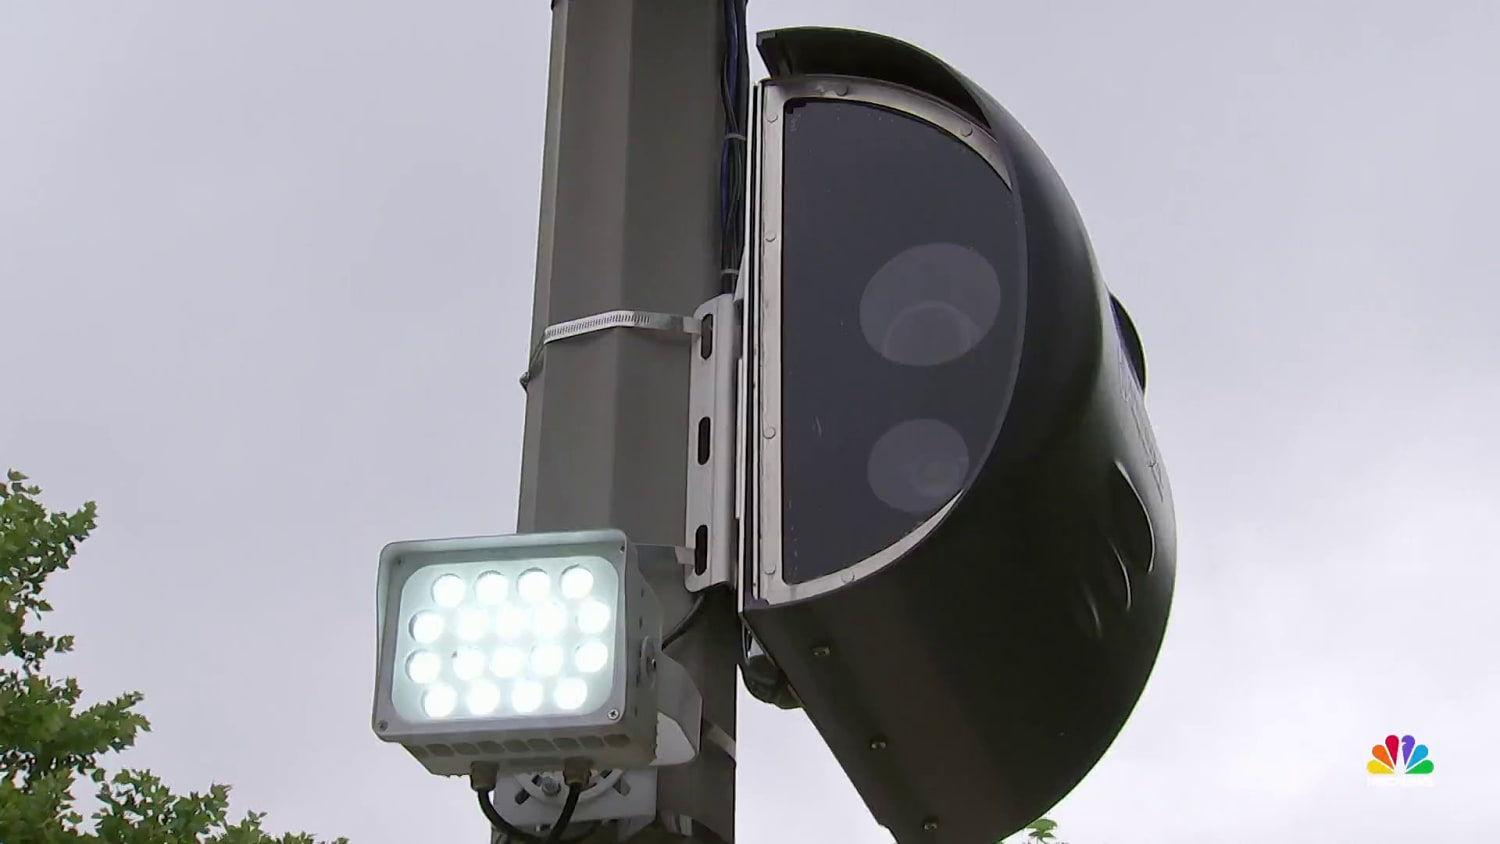 Drivers paying the price as stop sign cameras expand across U.S.